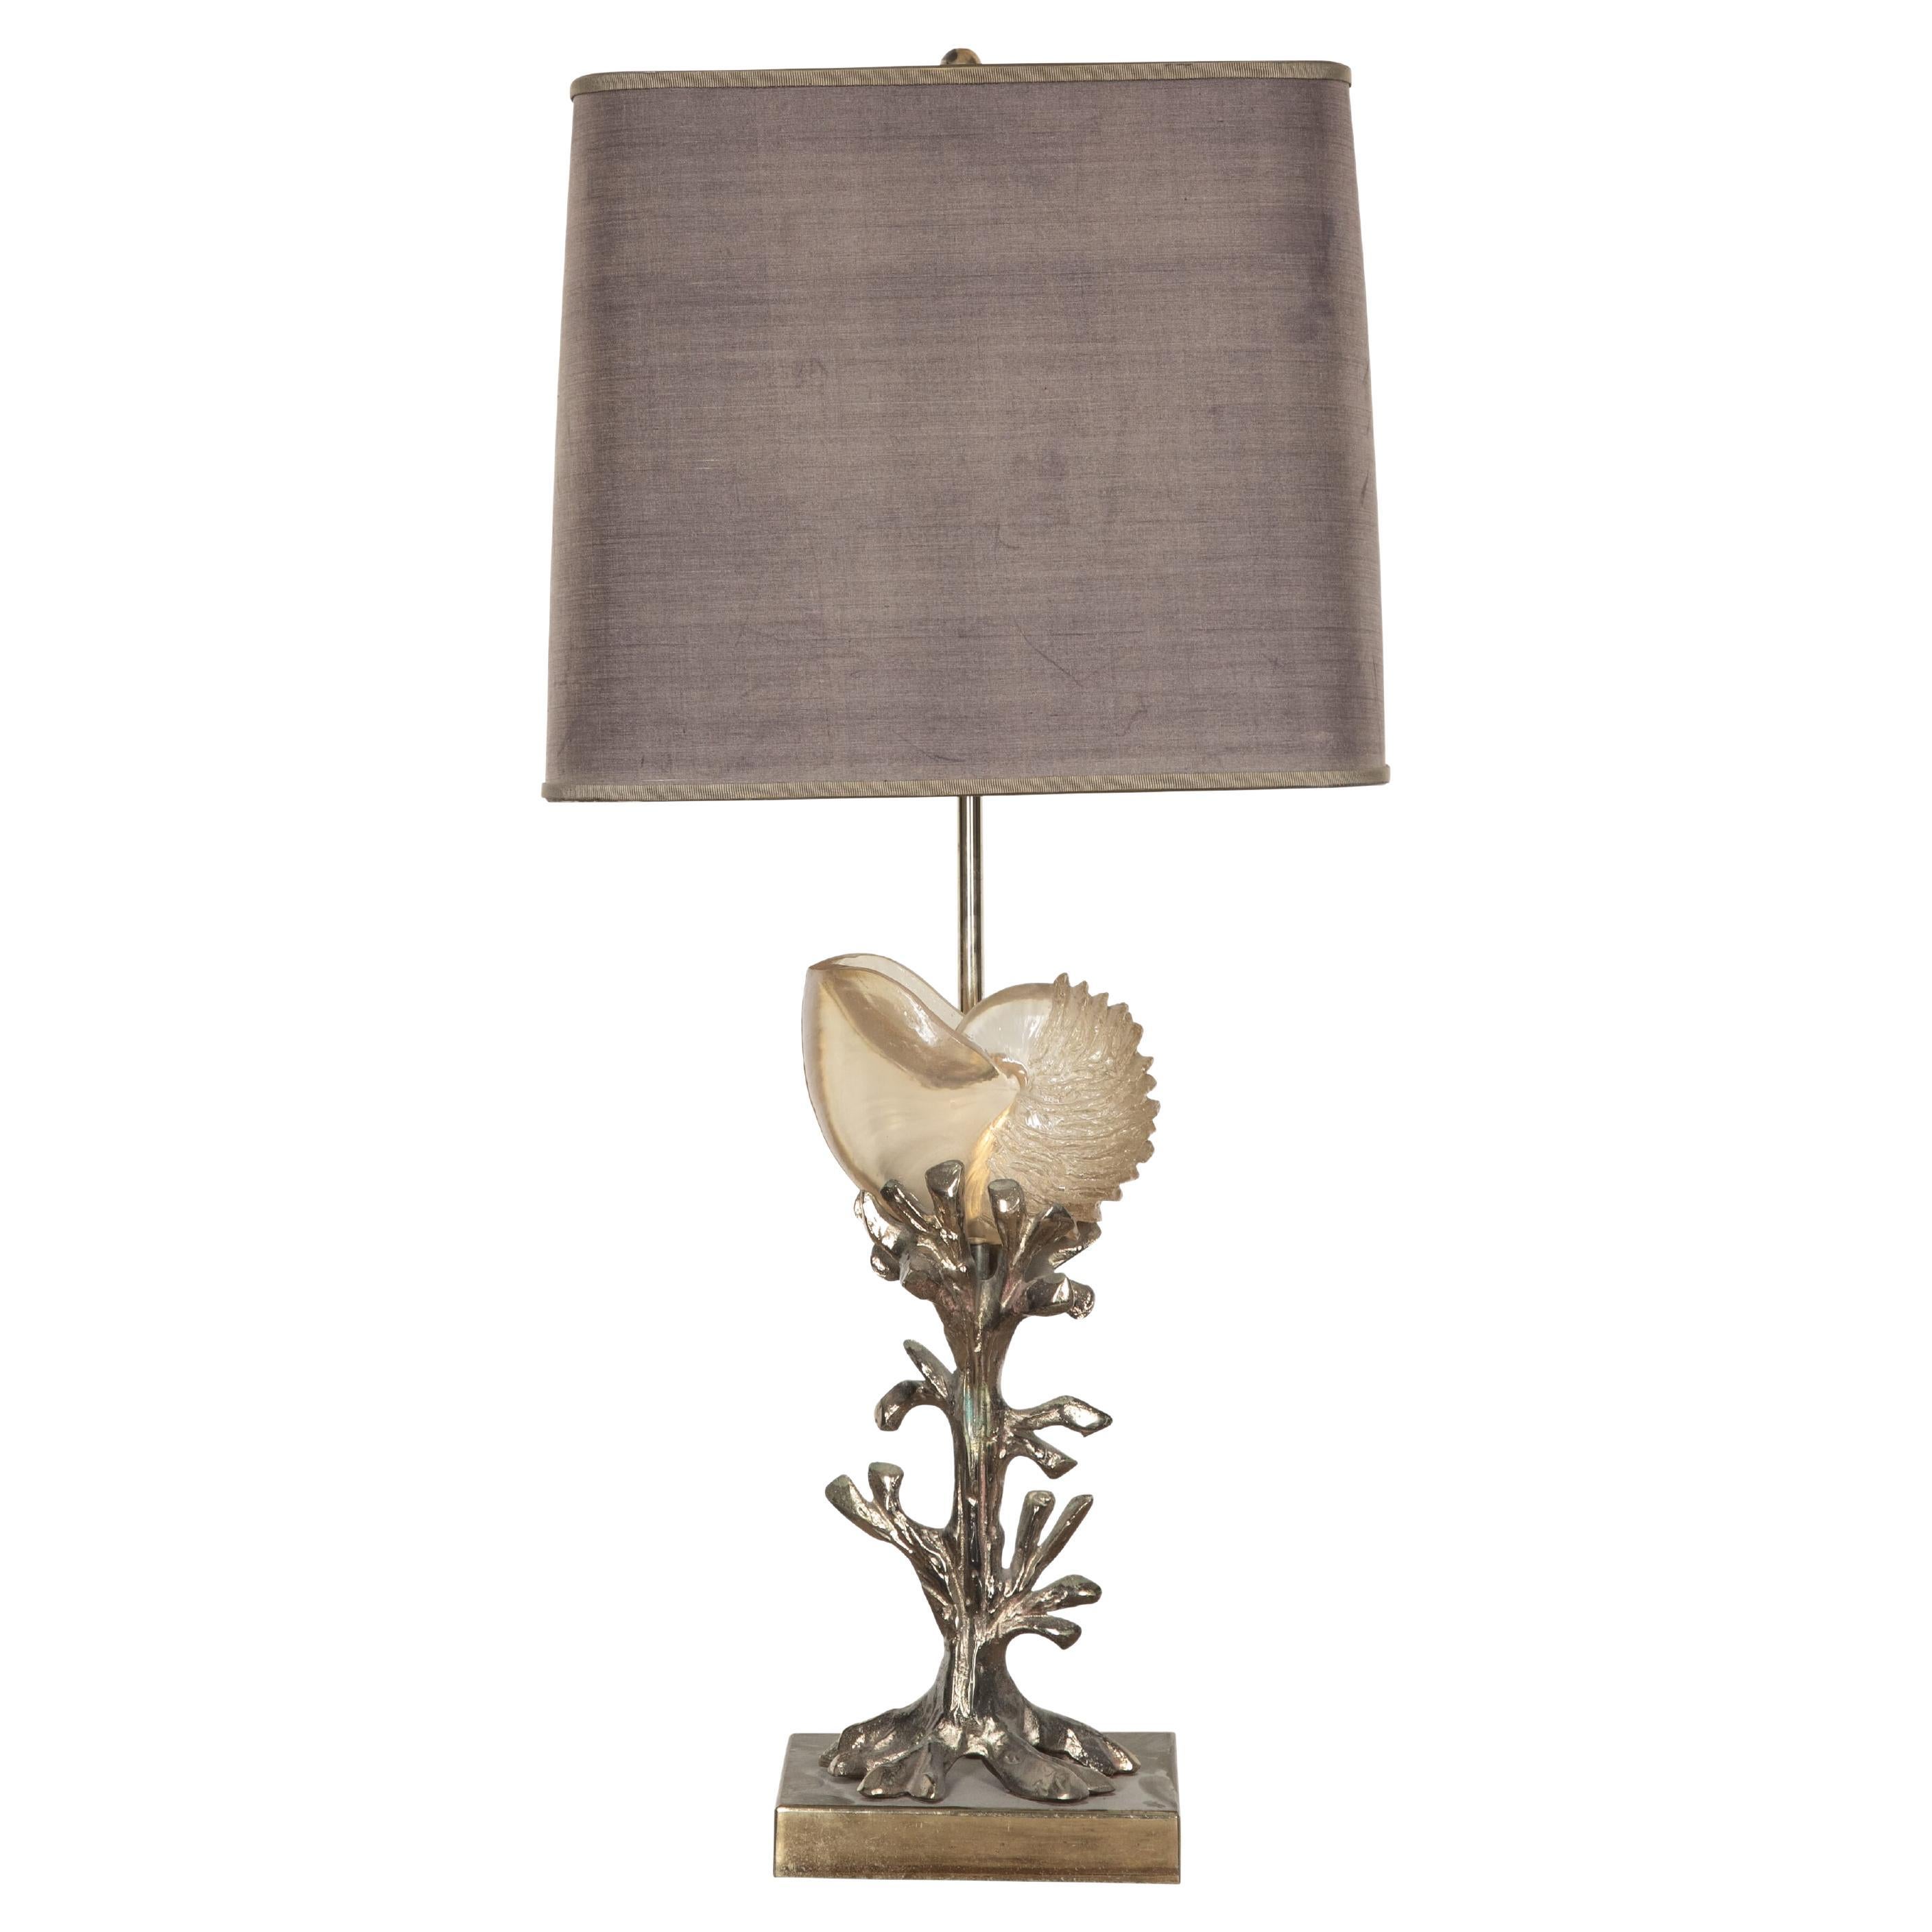 20th Century French Table Lamp